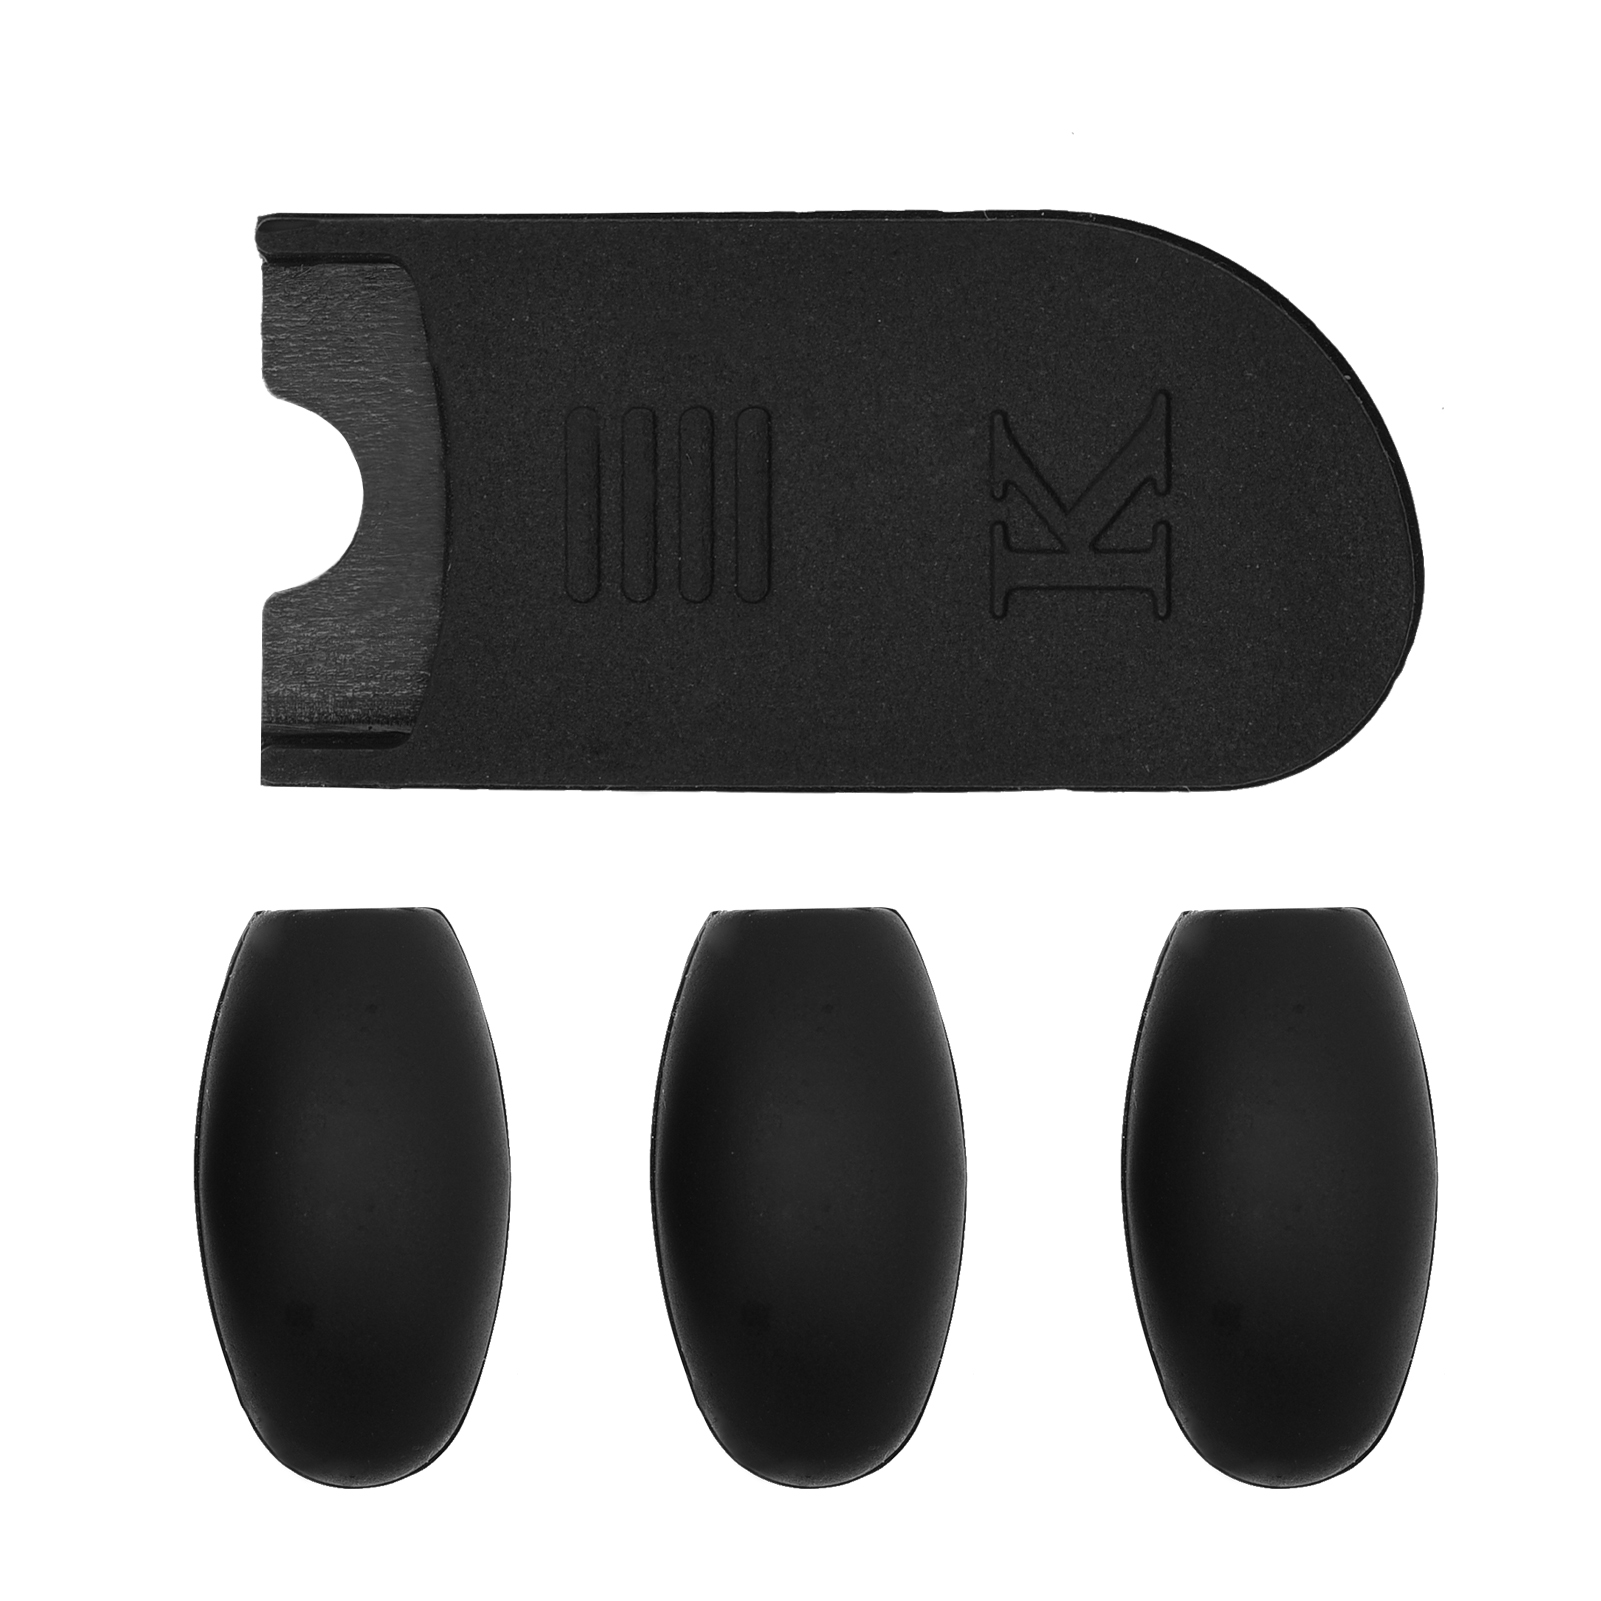 Saxophone Thumb Rest Cushion Palm Key Riser Pads Set Silicone Gel Finger Protector for Alto Tenor Soprano Saxophone